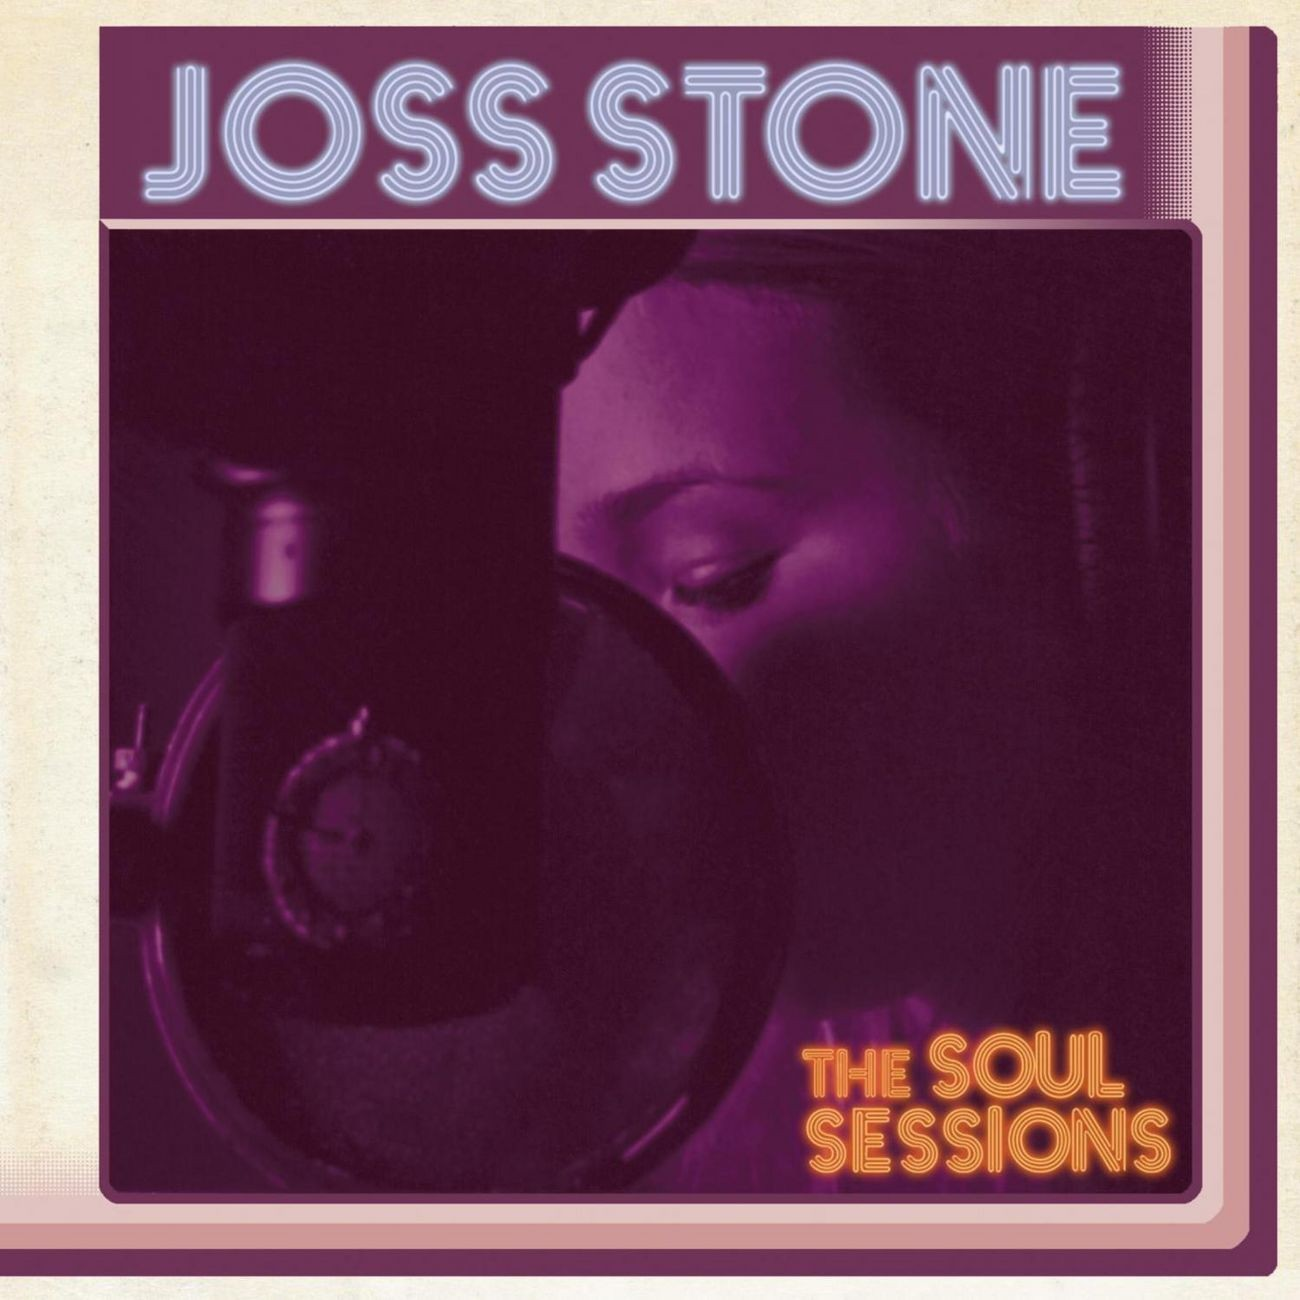 Download Free Joss Stone Discography Rapidshare Search